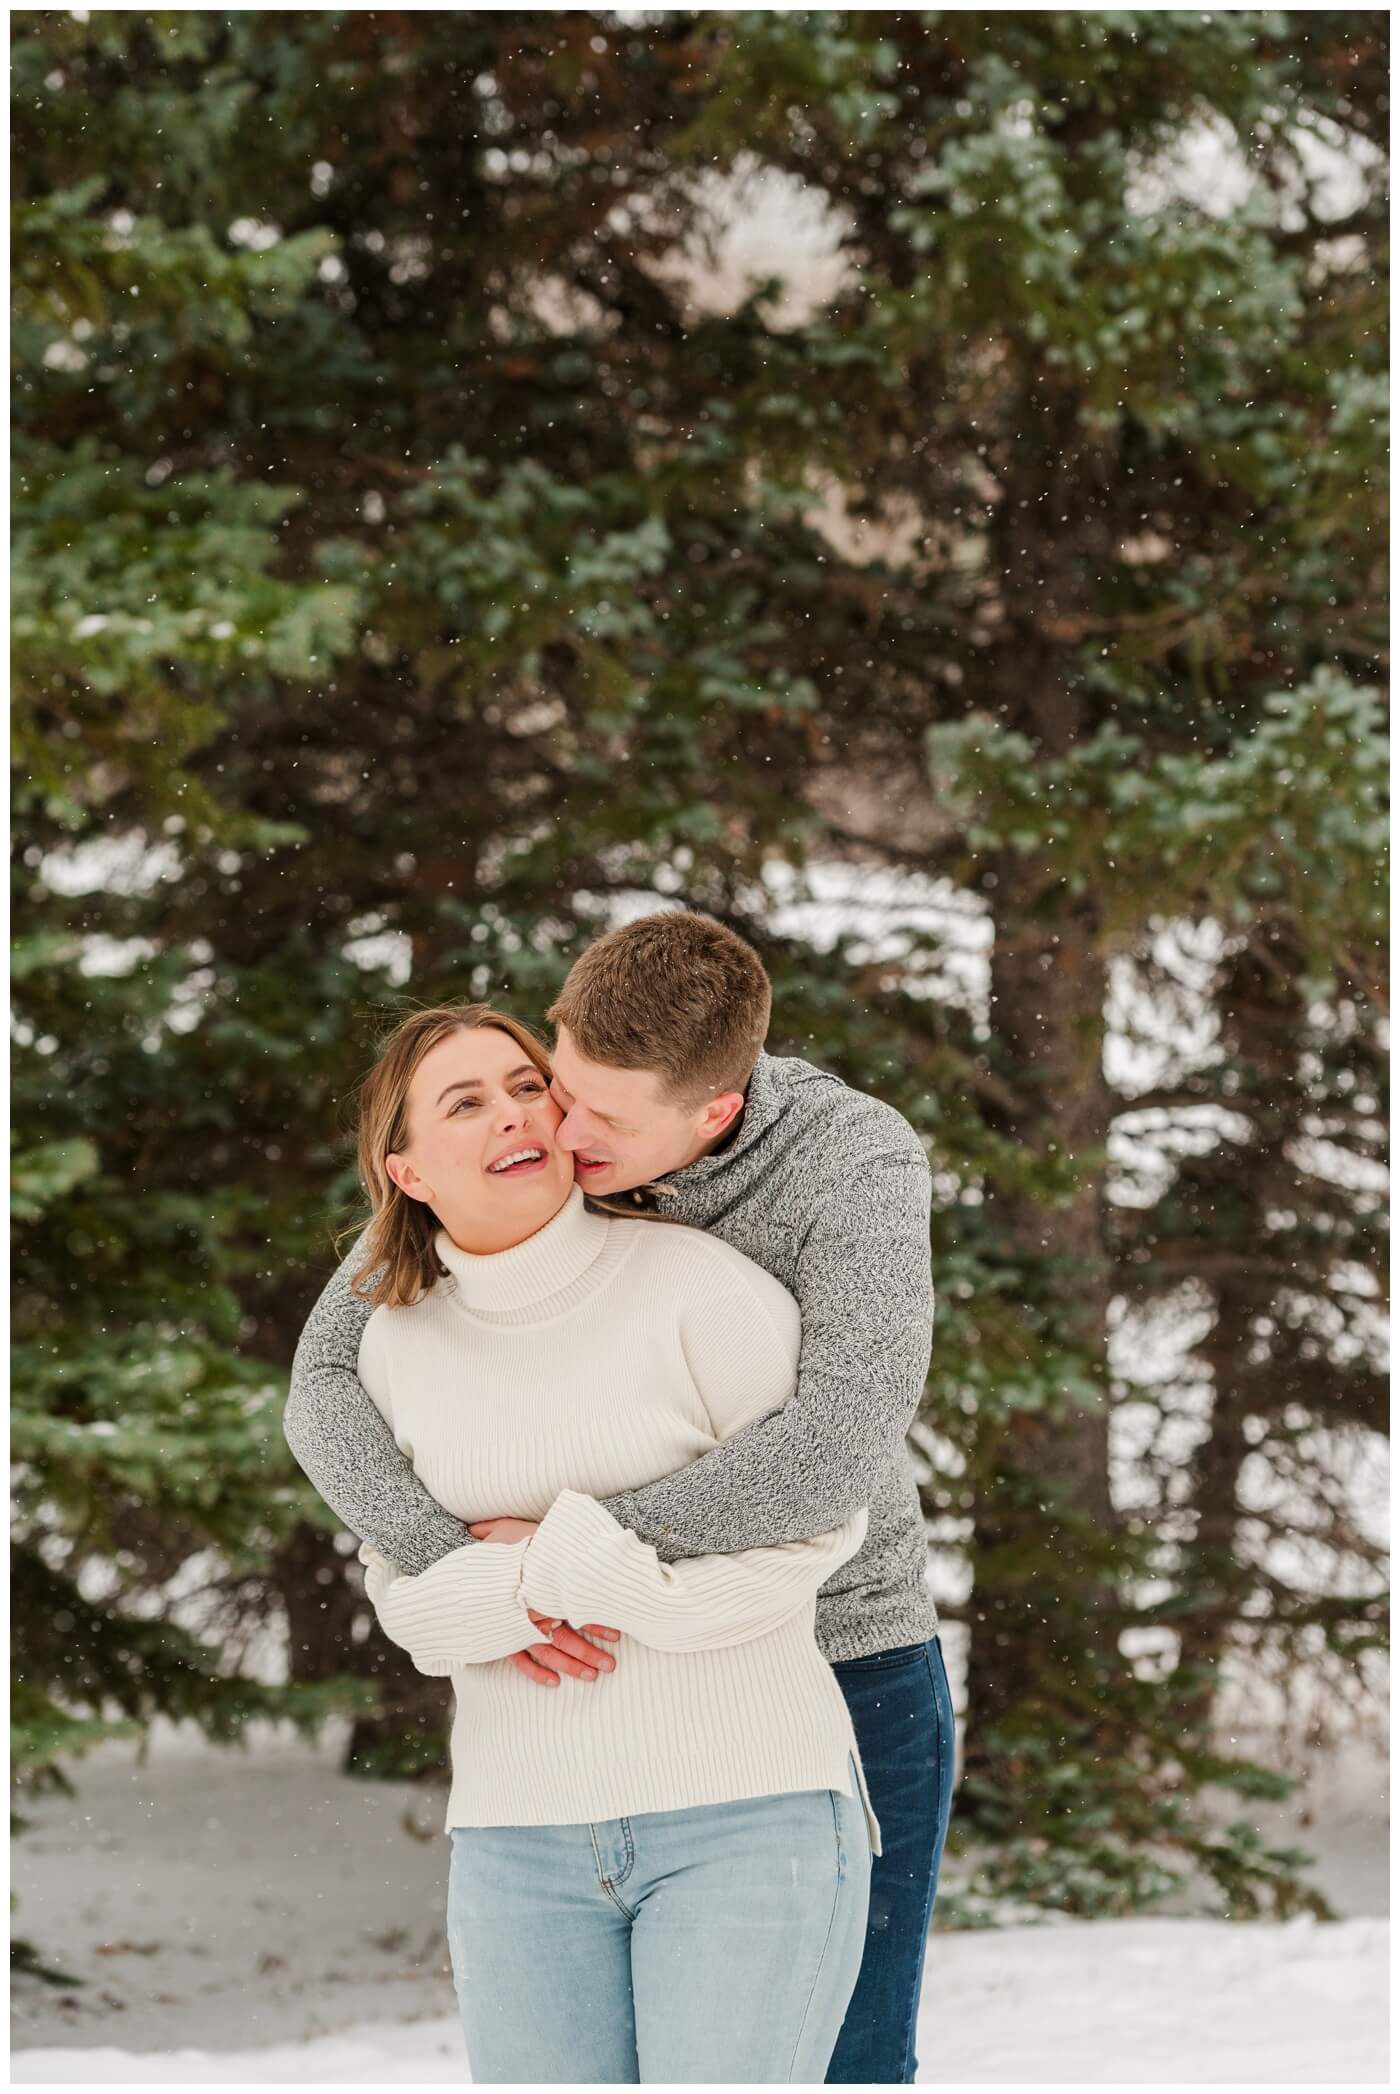 Michael & Briana - Engagement Session - 10 - UofR - Couple snuggling as the snow falls